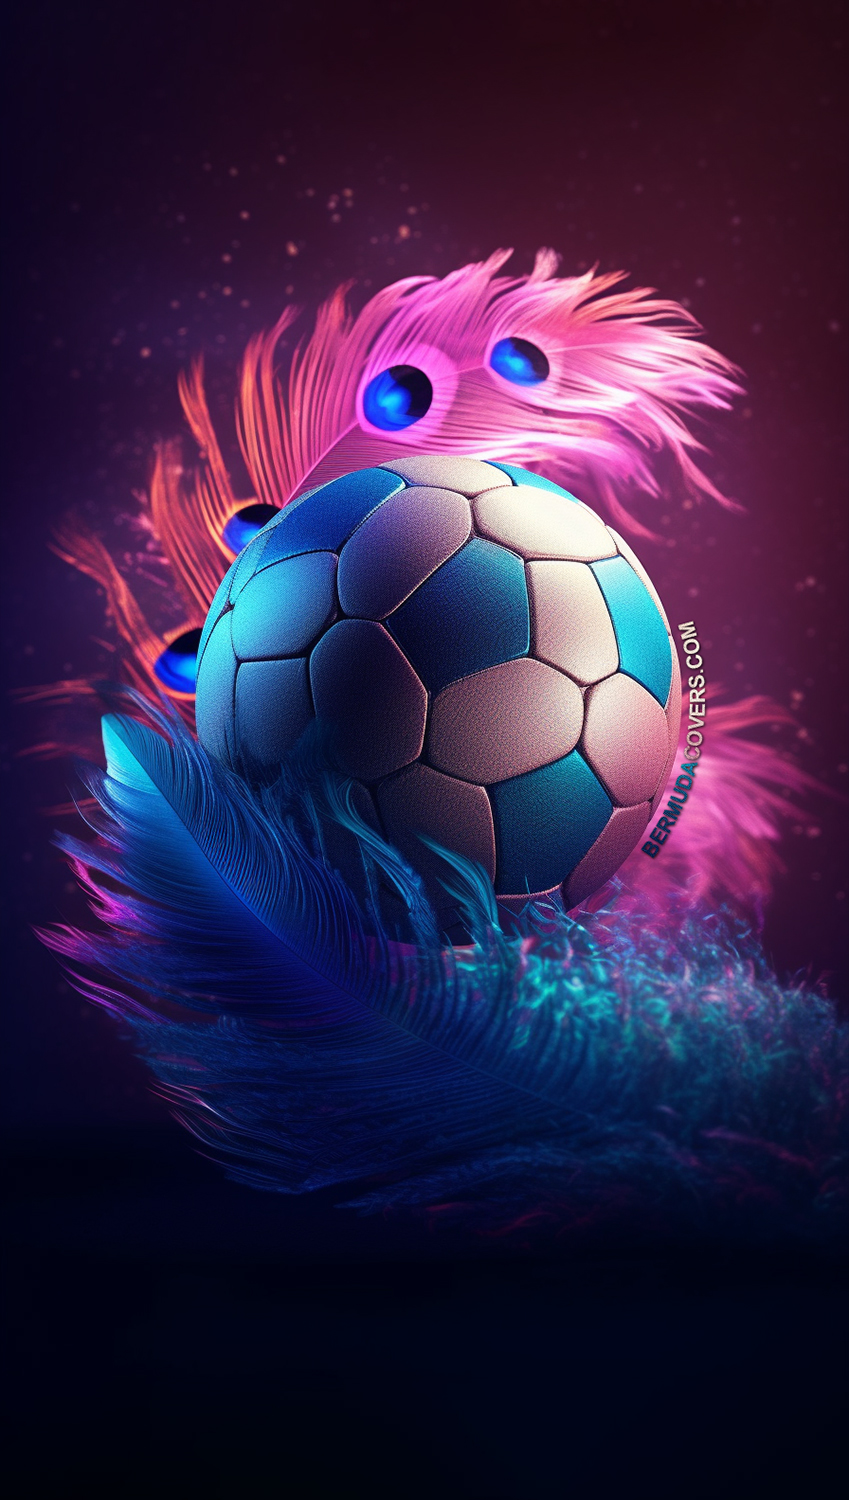 Soccer Baby Cell Phone Wallpaper Images Free Download on Lovepik  400241751